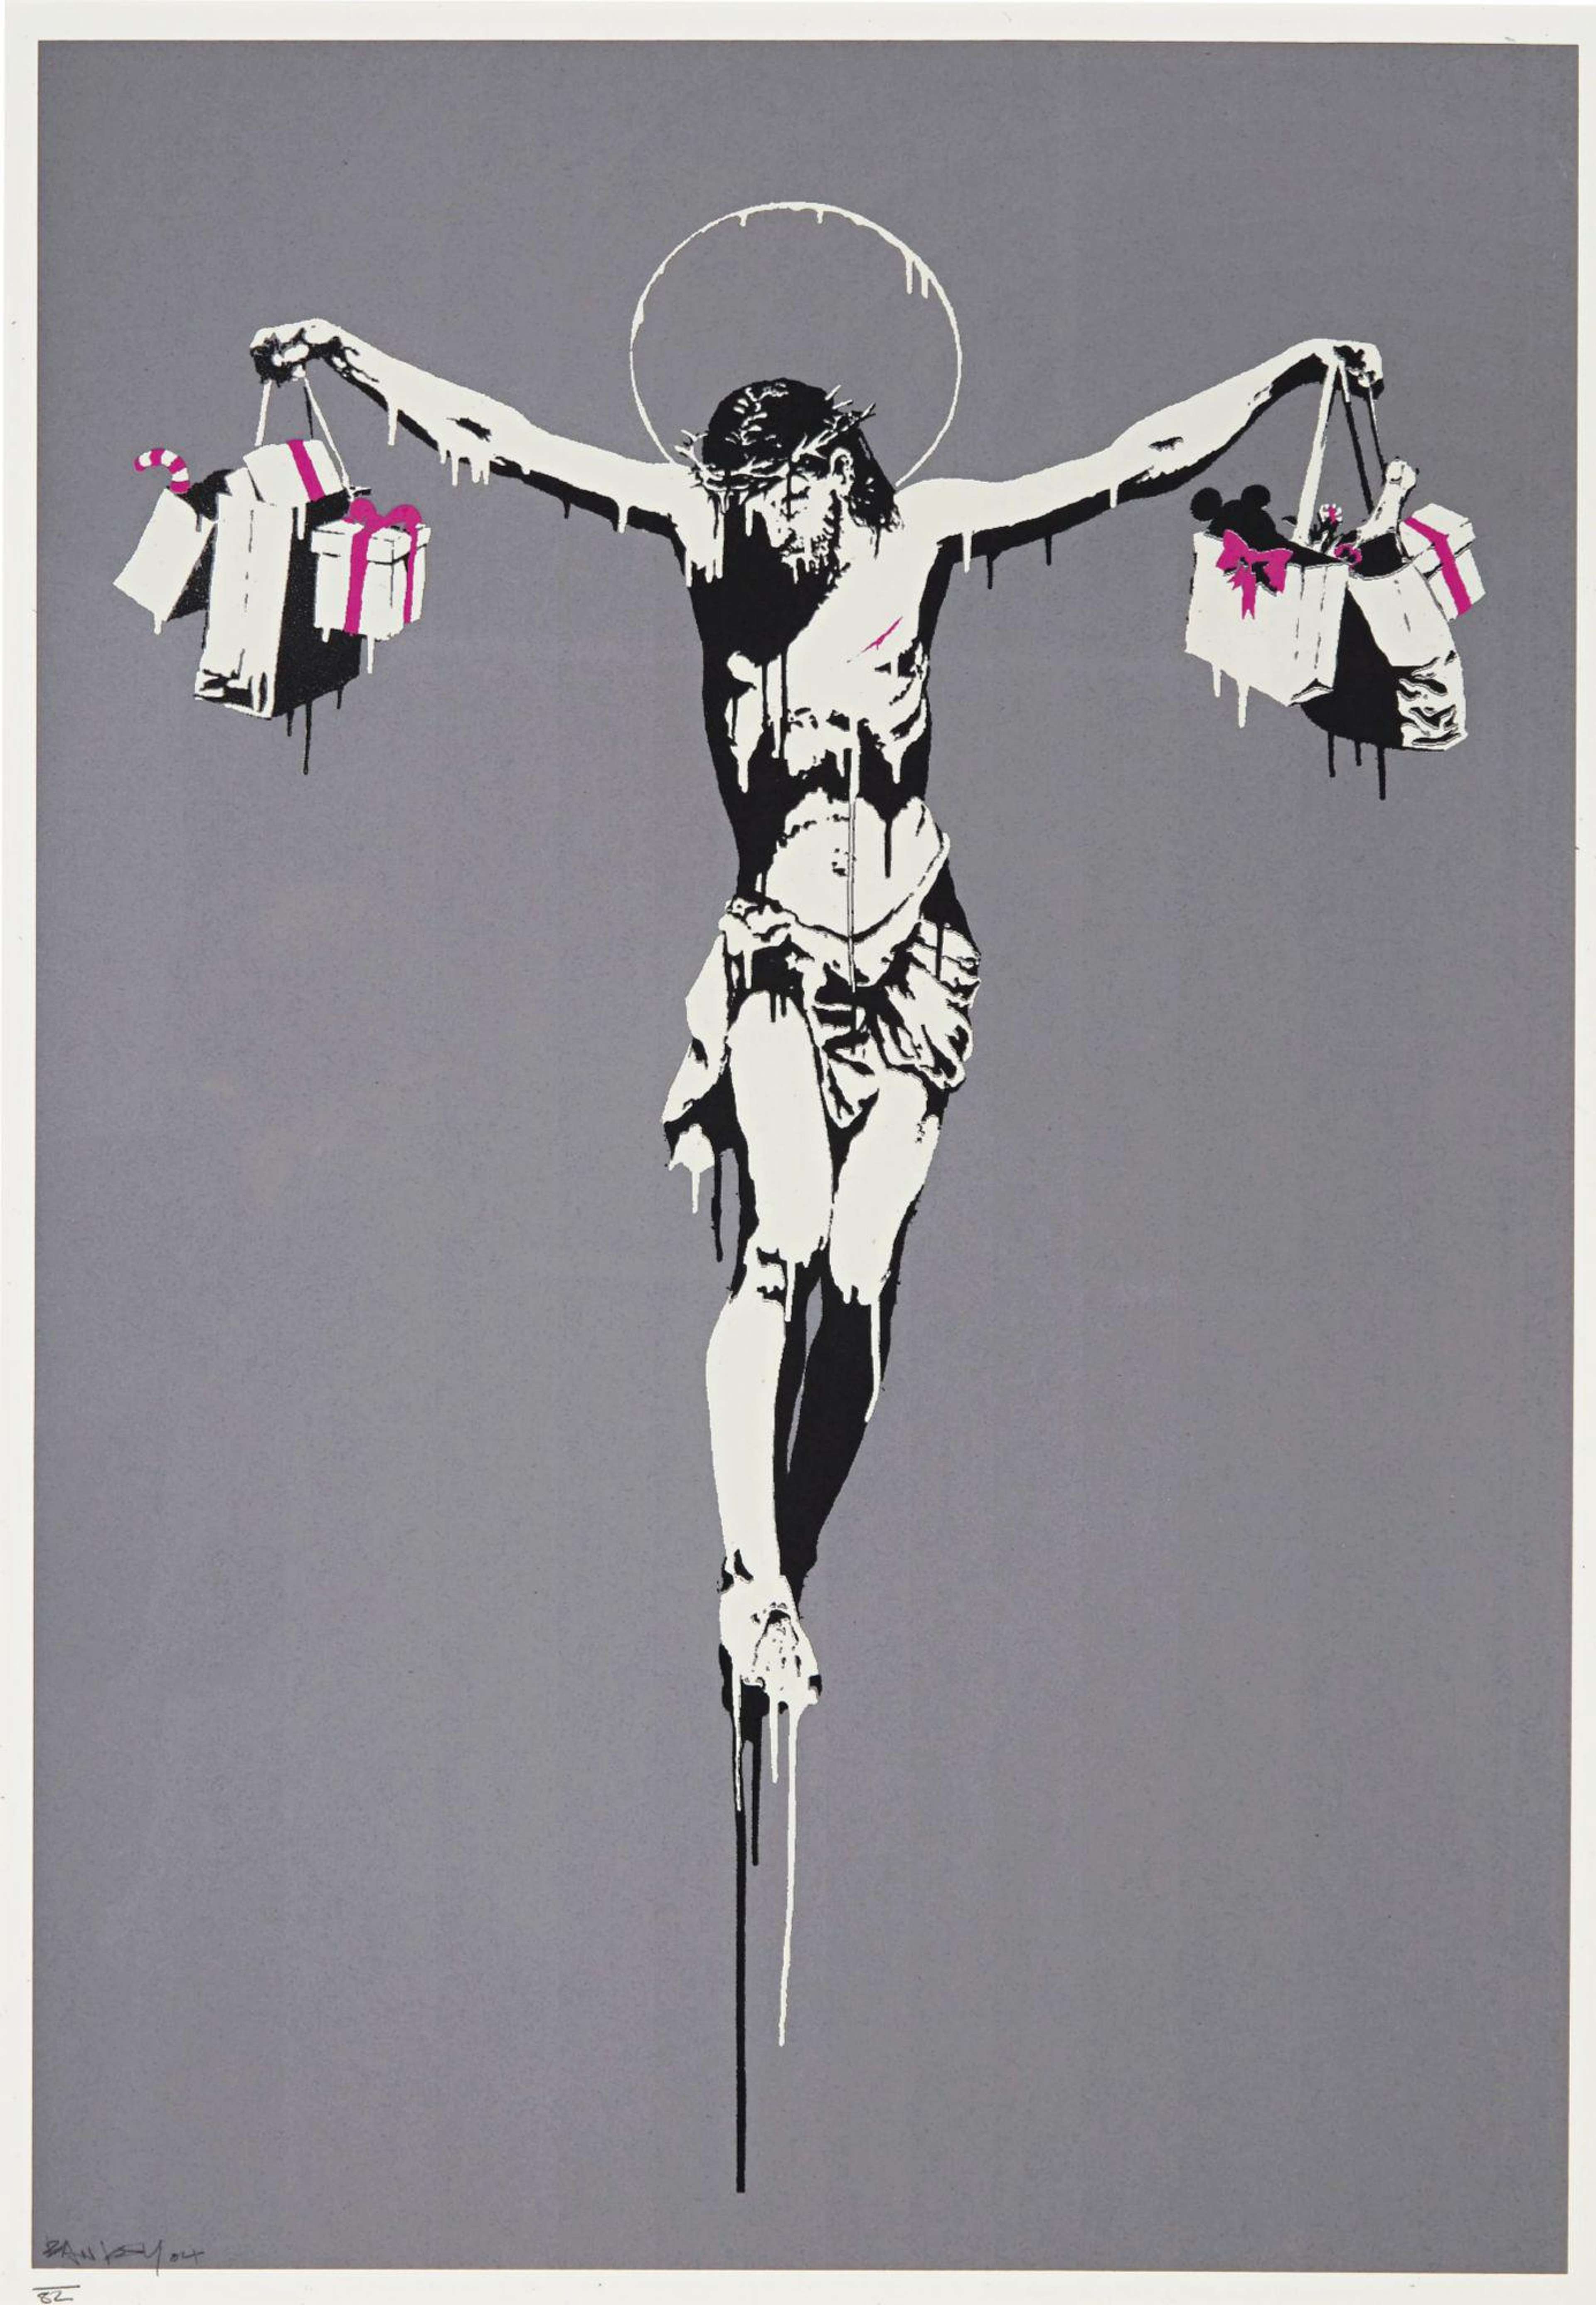 Christ With Shopping Bags by Banksy